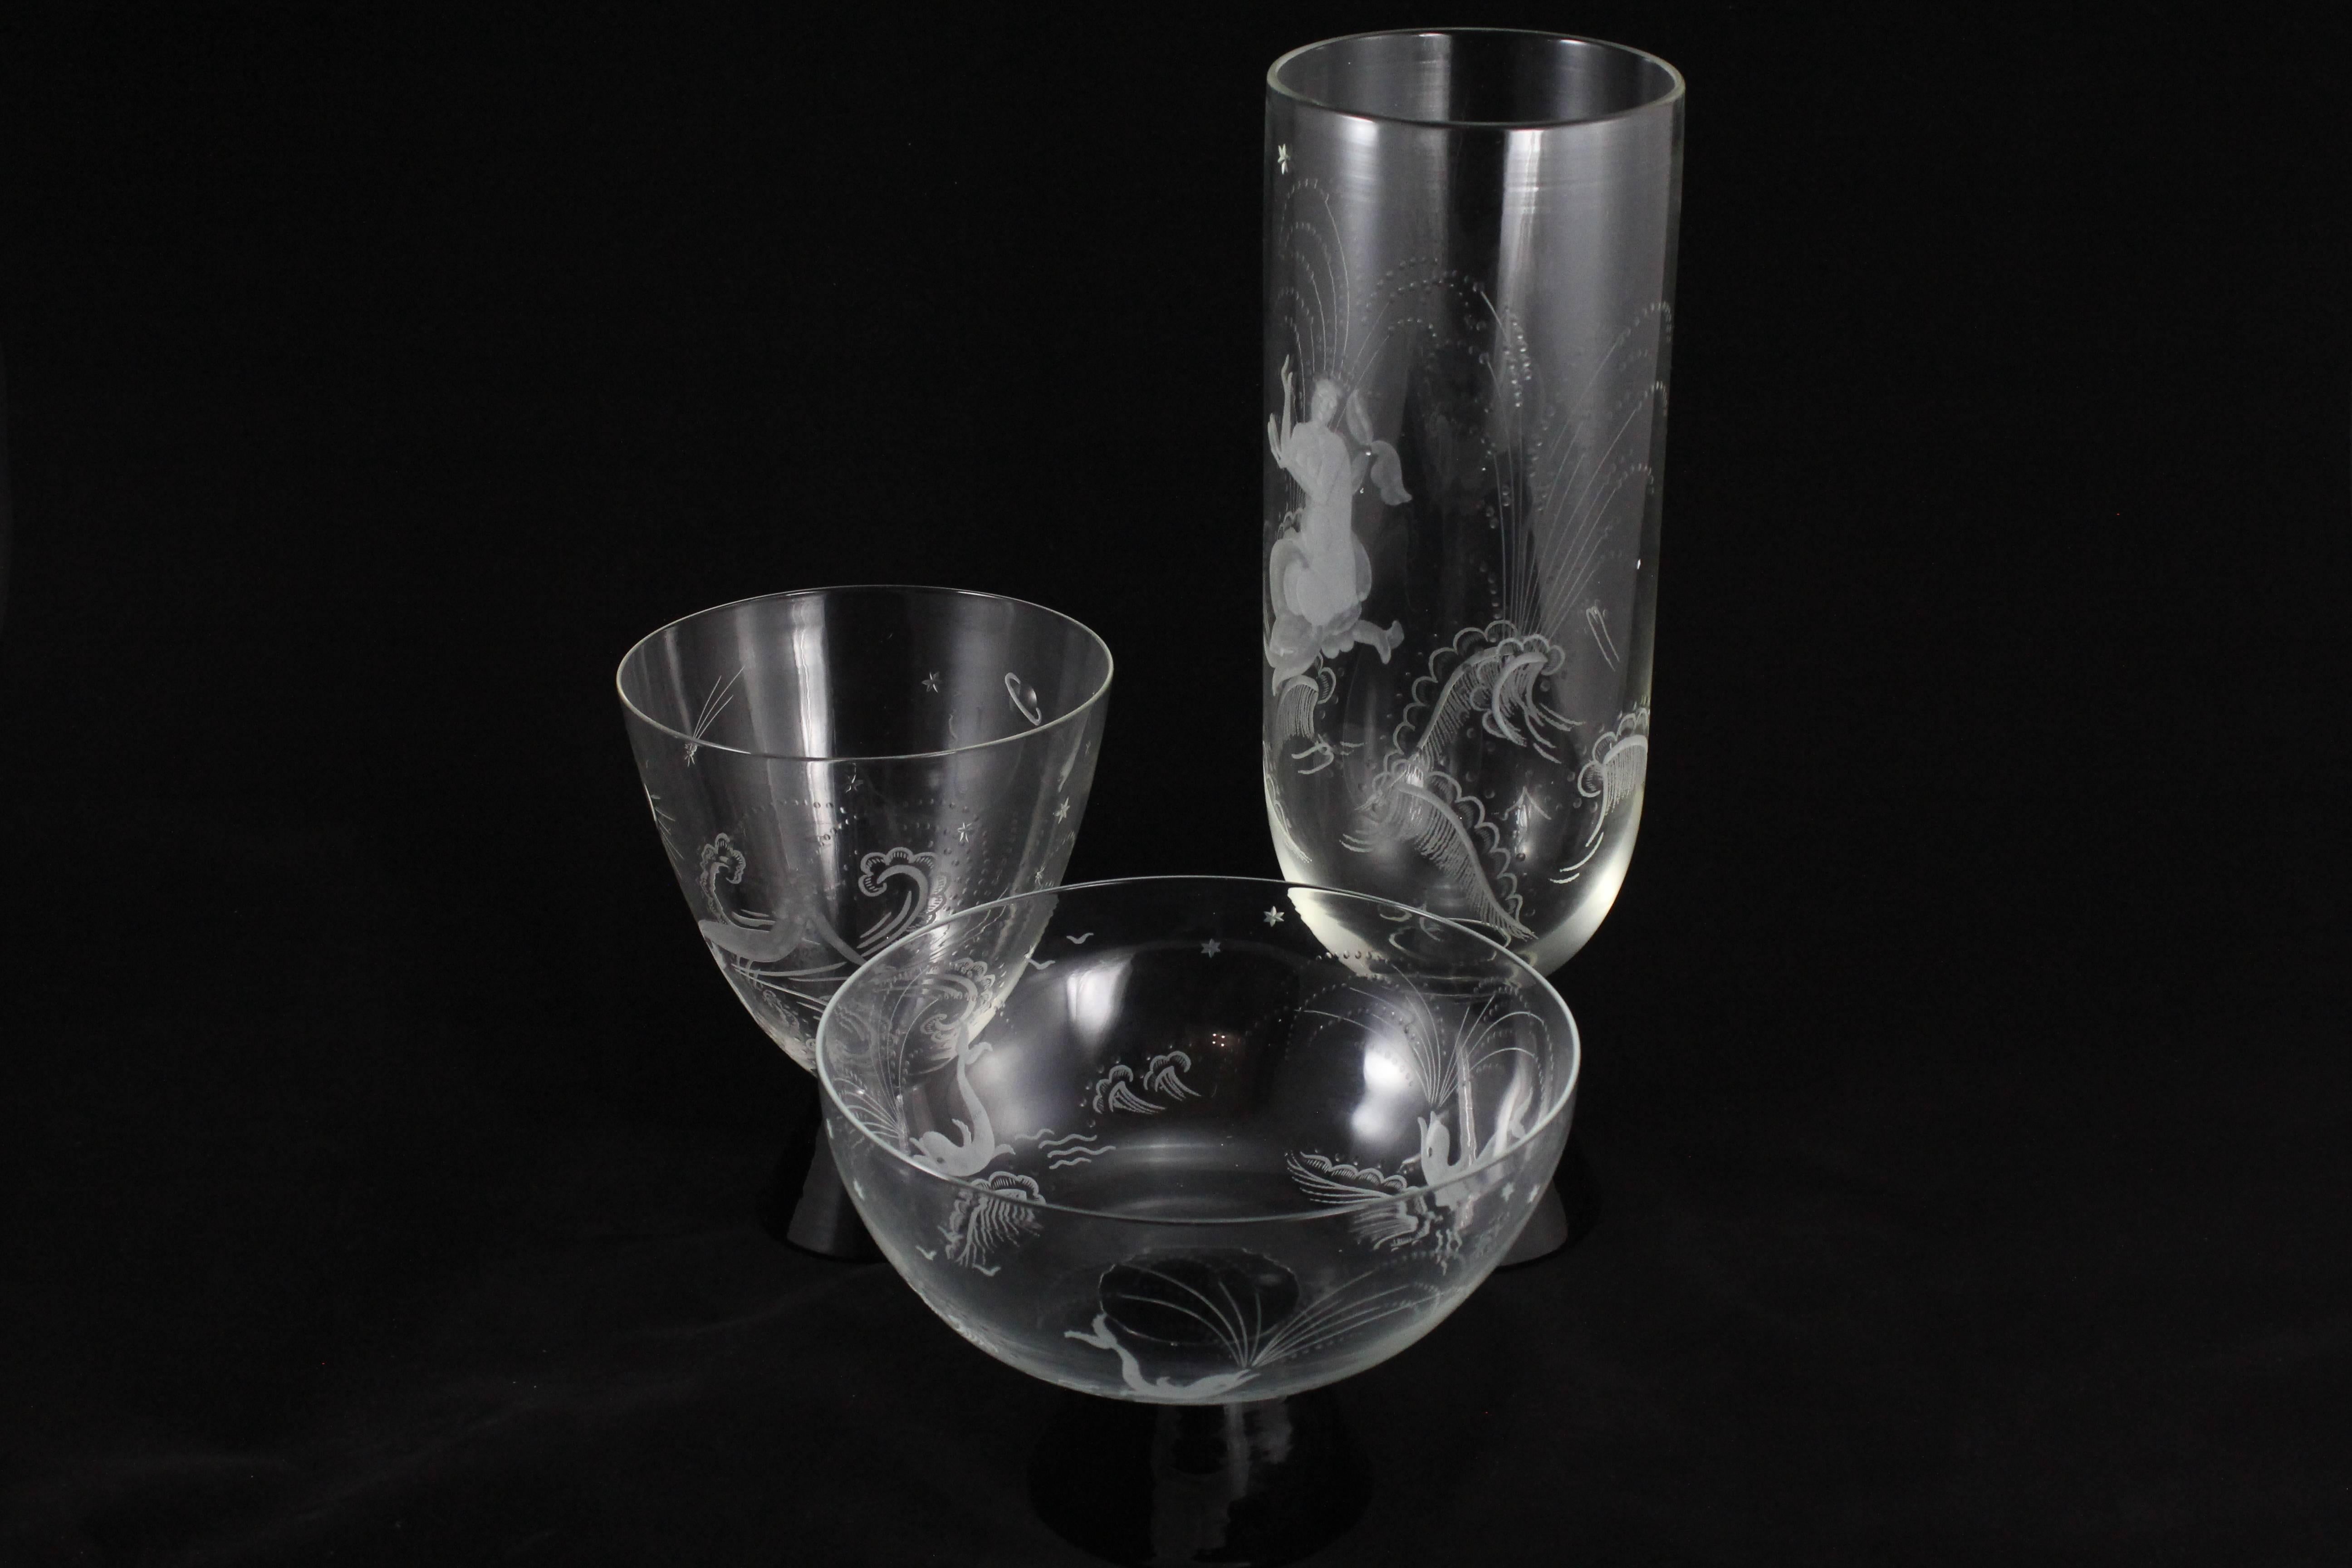 A very fine example of the work by Venetian glass artisan Guido Balsamo Stella. This trio of meticulously hand etched glass vases, circa 1925, depict mermaids, dolphins and the galaxy on exceptionally fine, tiered vessels with conical black glass